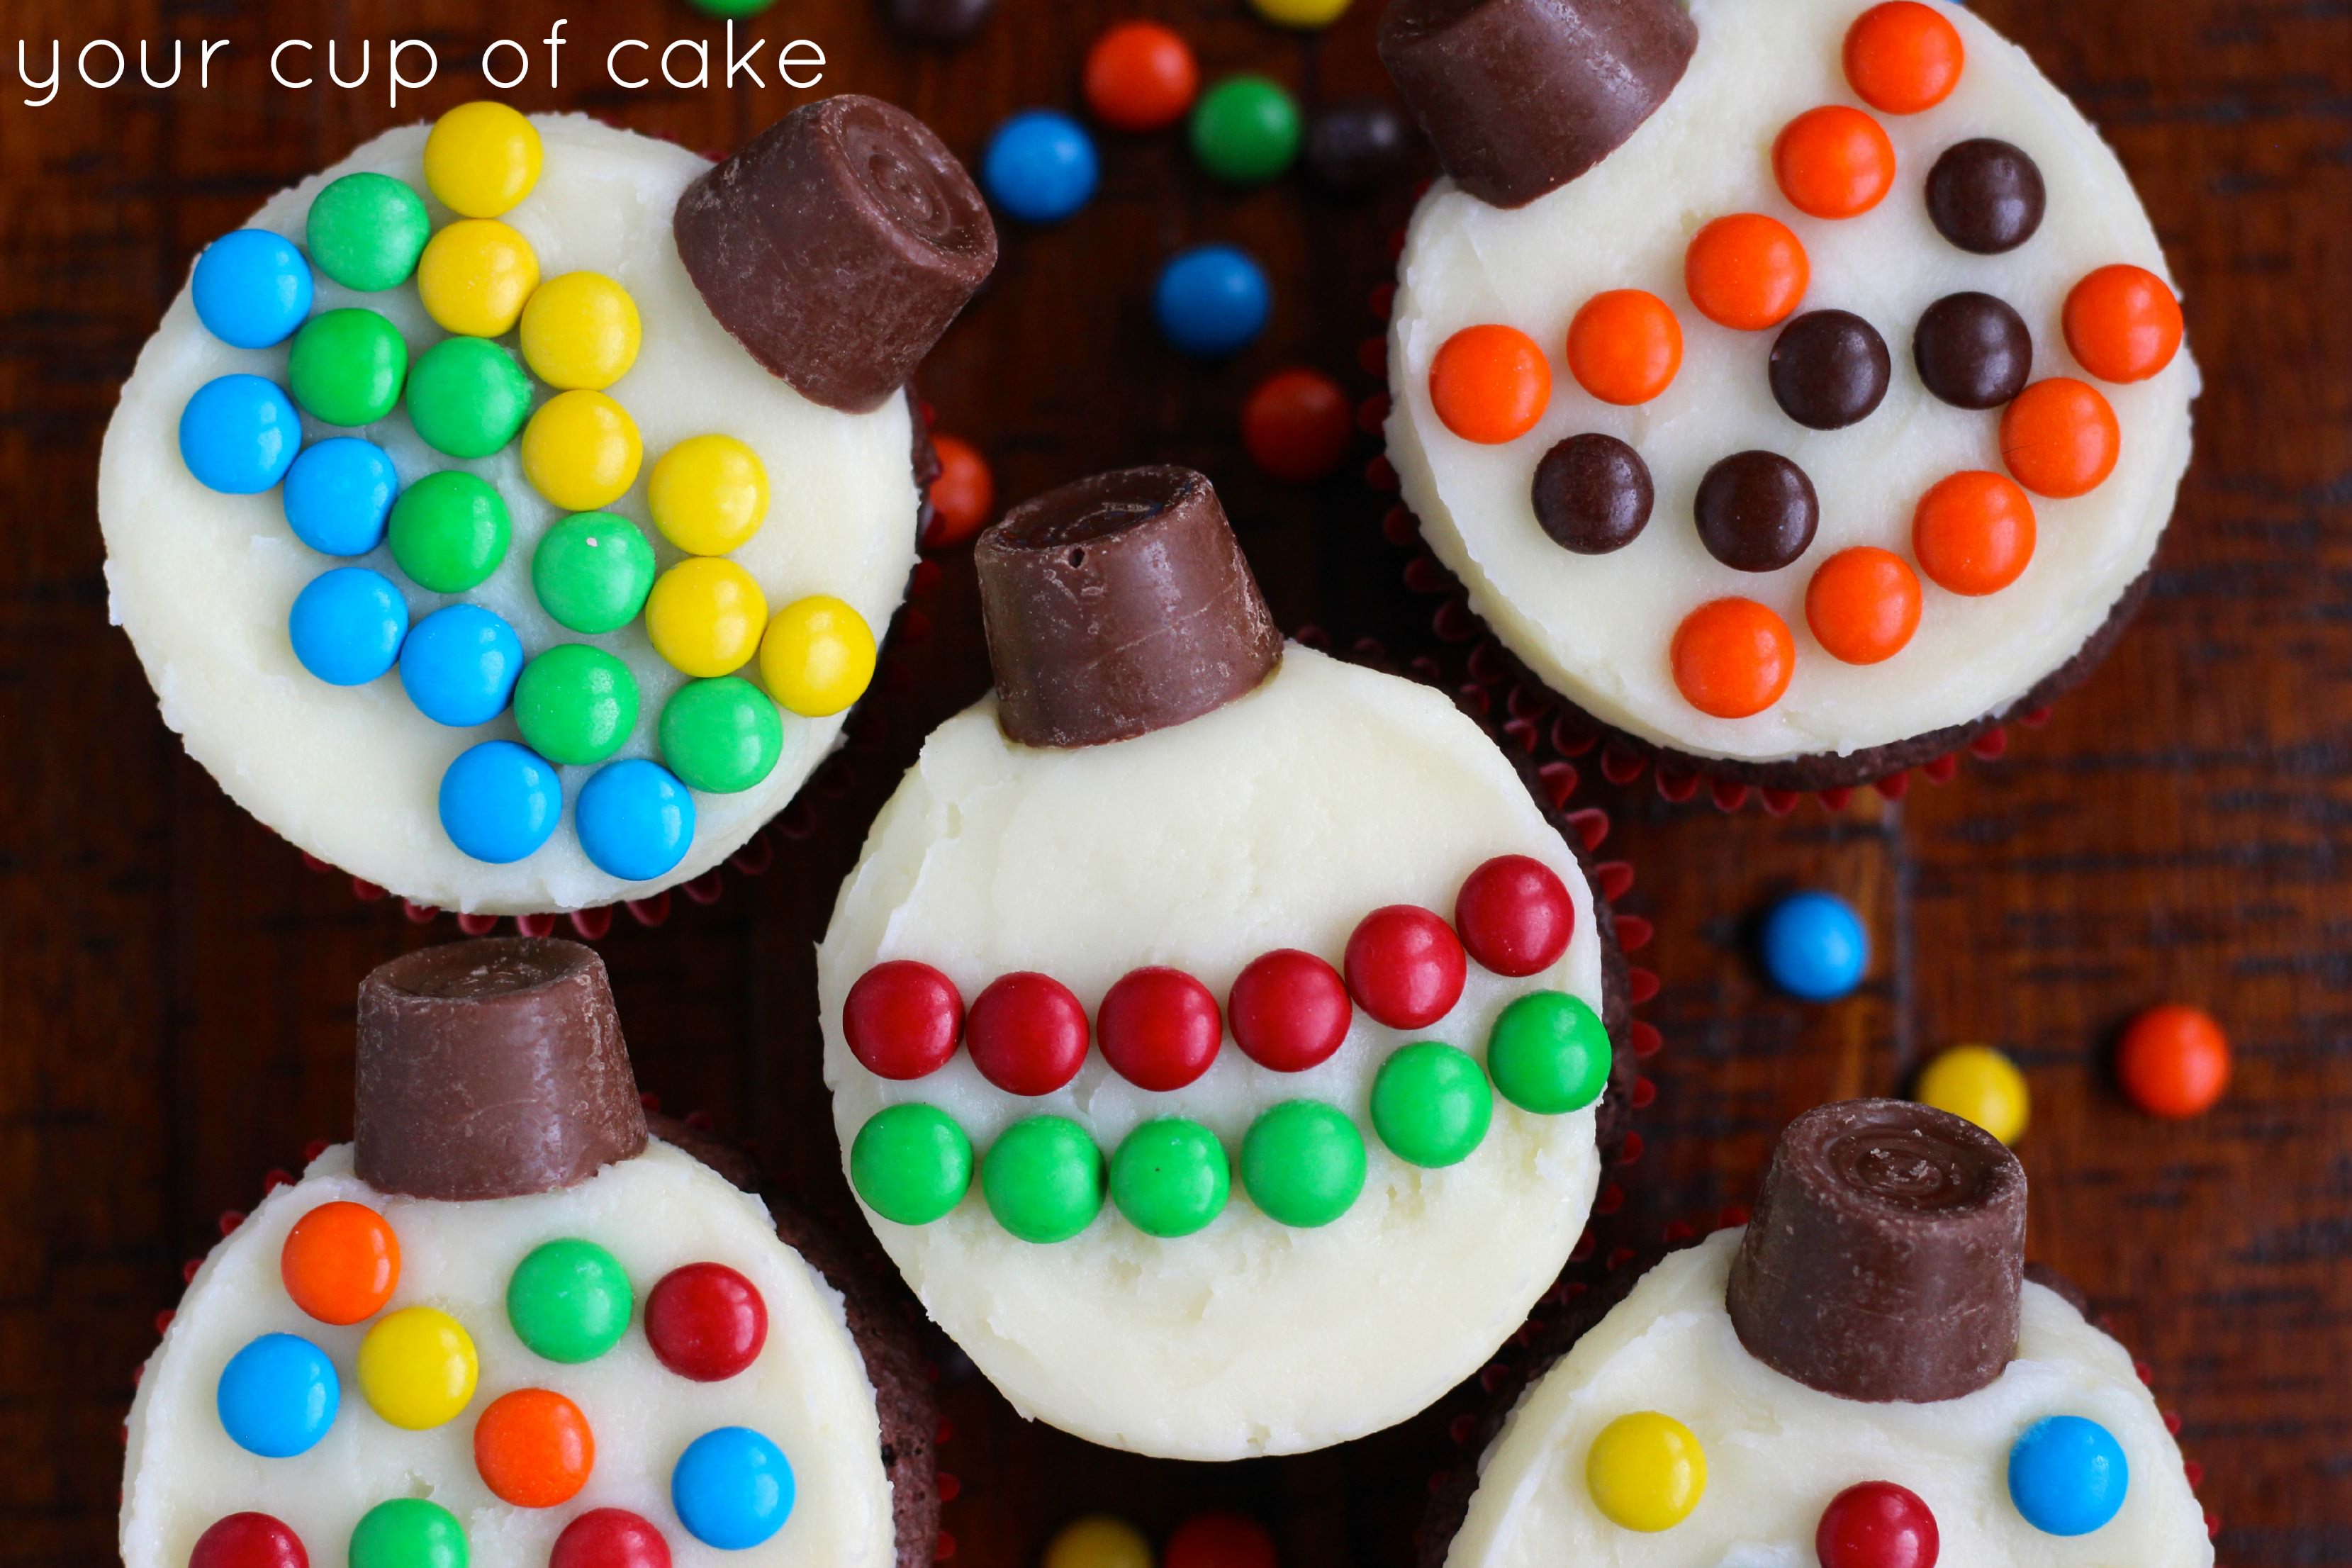 Easy Cupcake Decorating For Christmas Your Cup Of Cake truly Decorating Cupcakes For Beginners